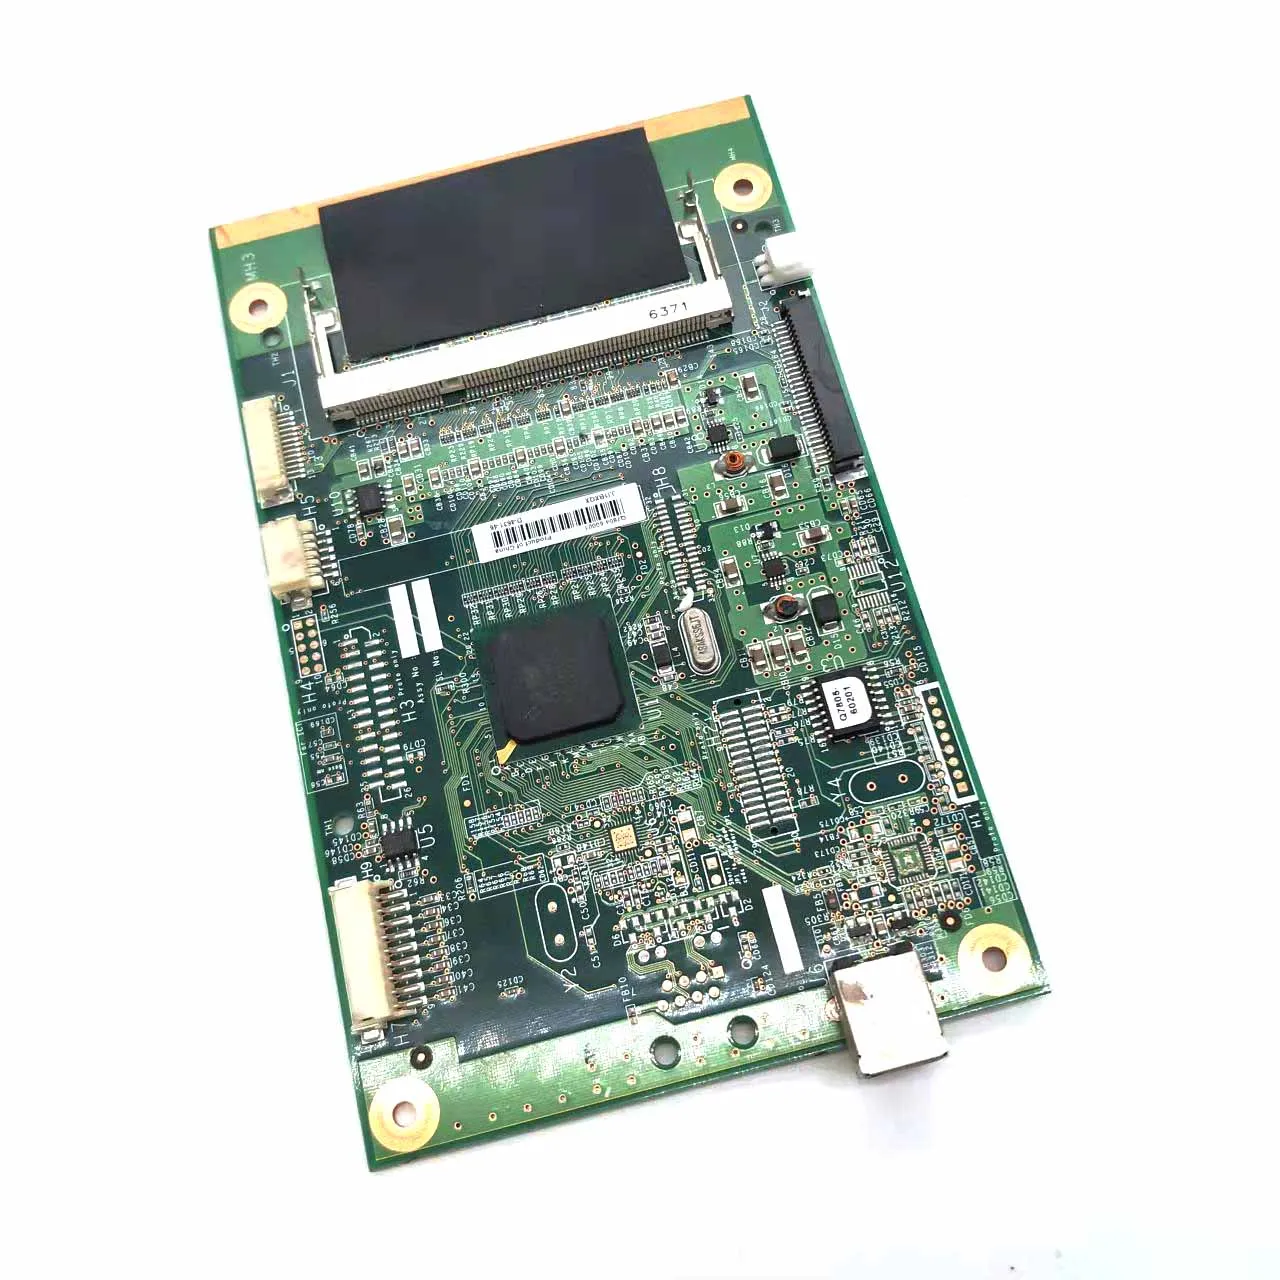 

FORMATTER PCA ASSY Formatter Board logic Main mother Board MainBoard Q7804-69003 Q7804-60001 fits for HP P2015D 2015D P2015 2015